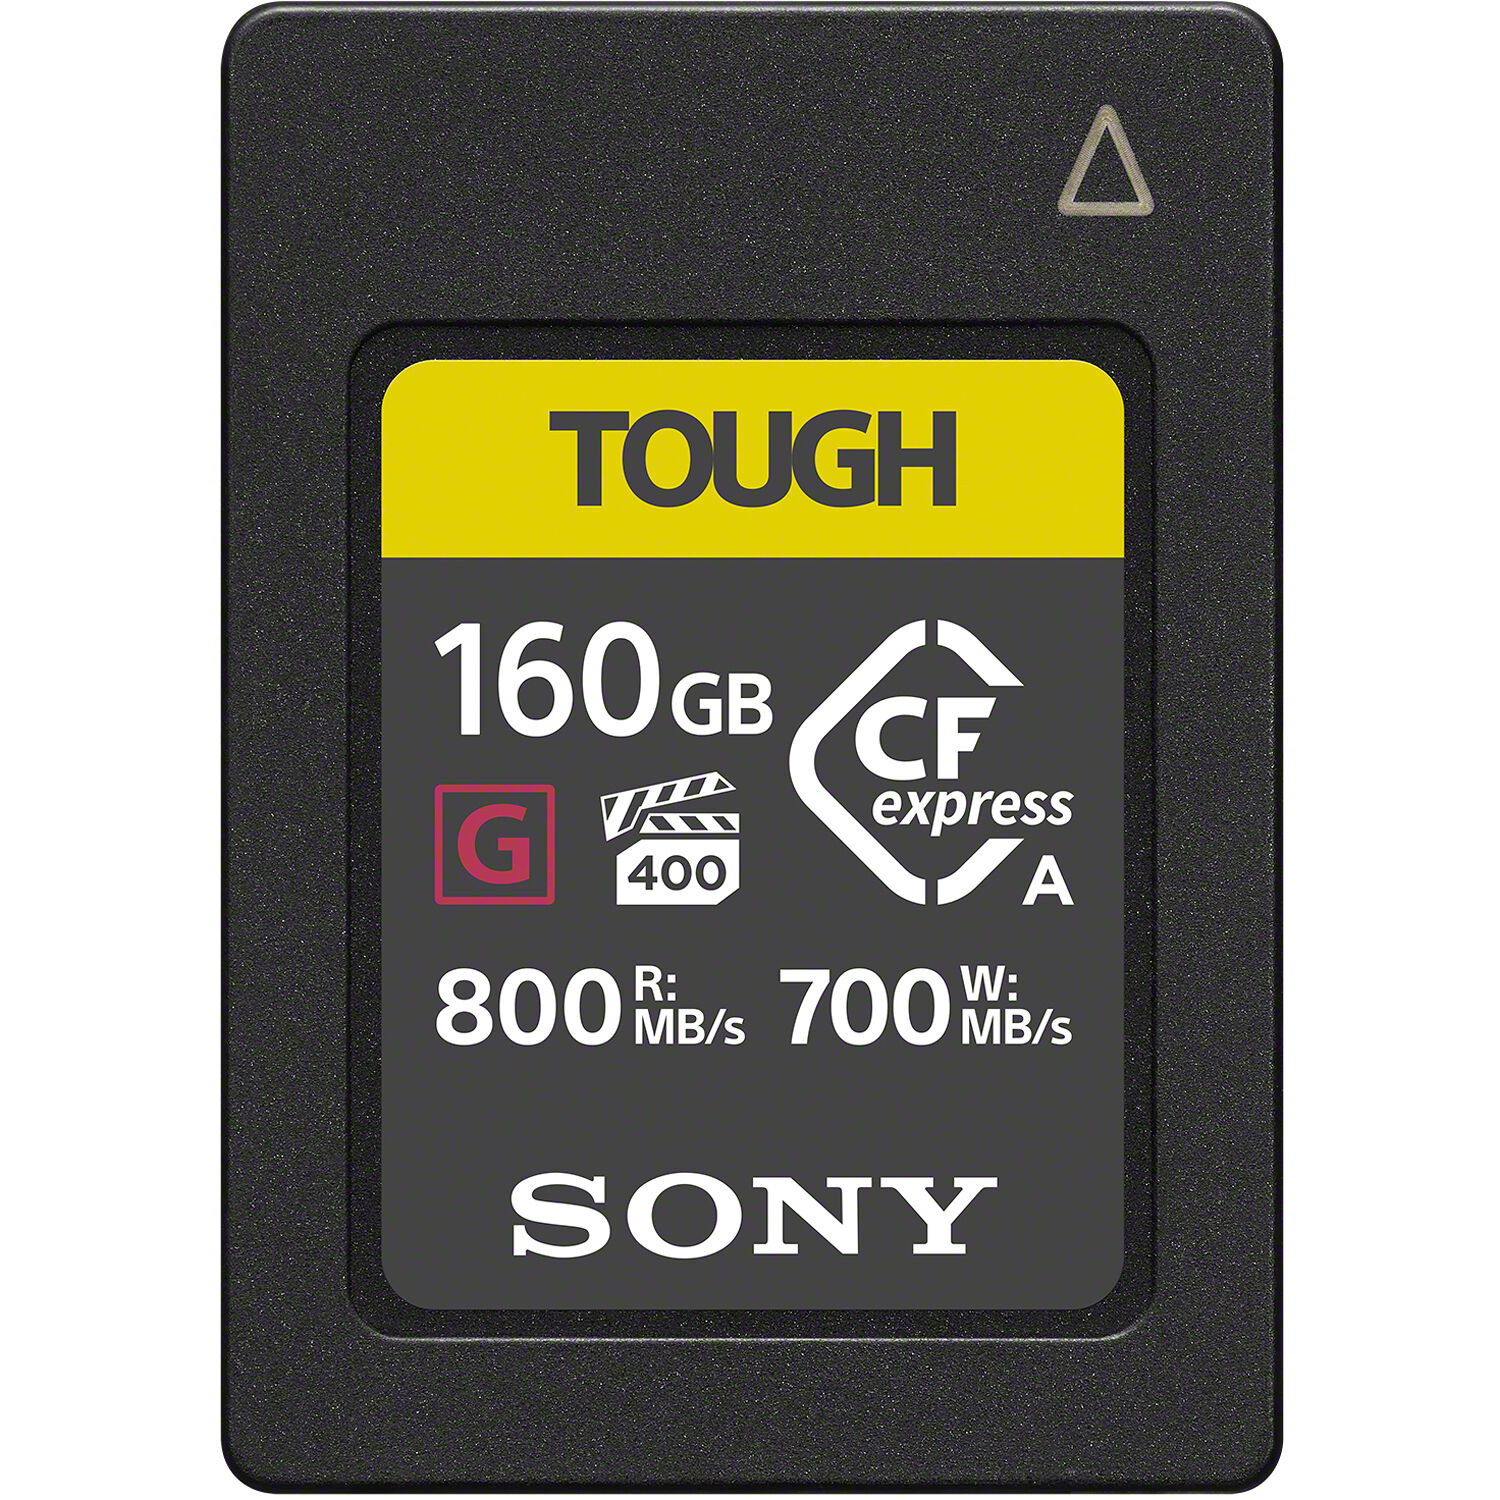 Thẻ nhớ Sony CFexpress Type A 160GB 800MB/s (CEA-G160T)